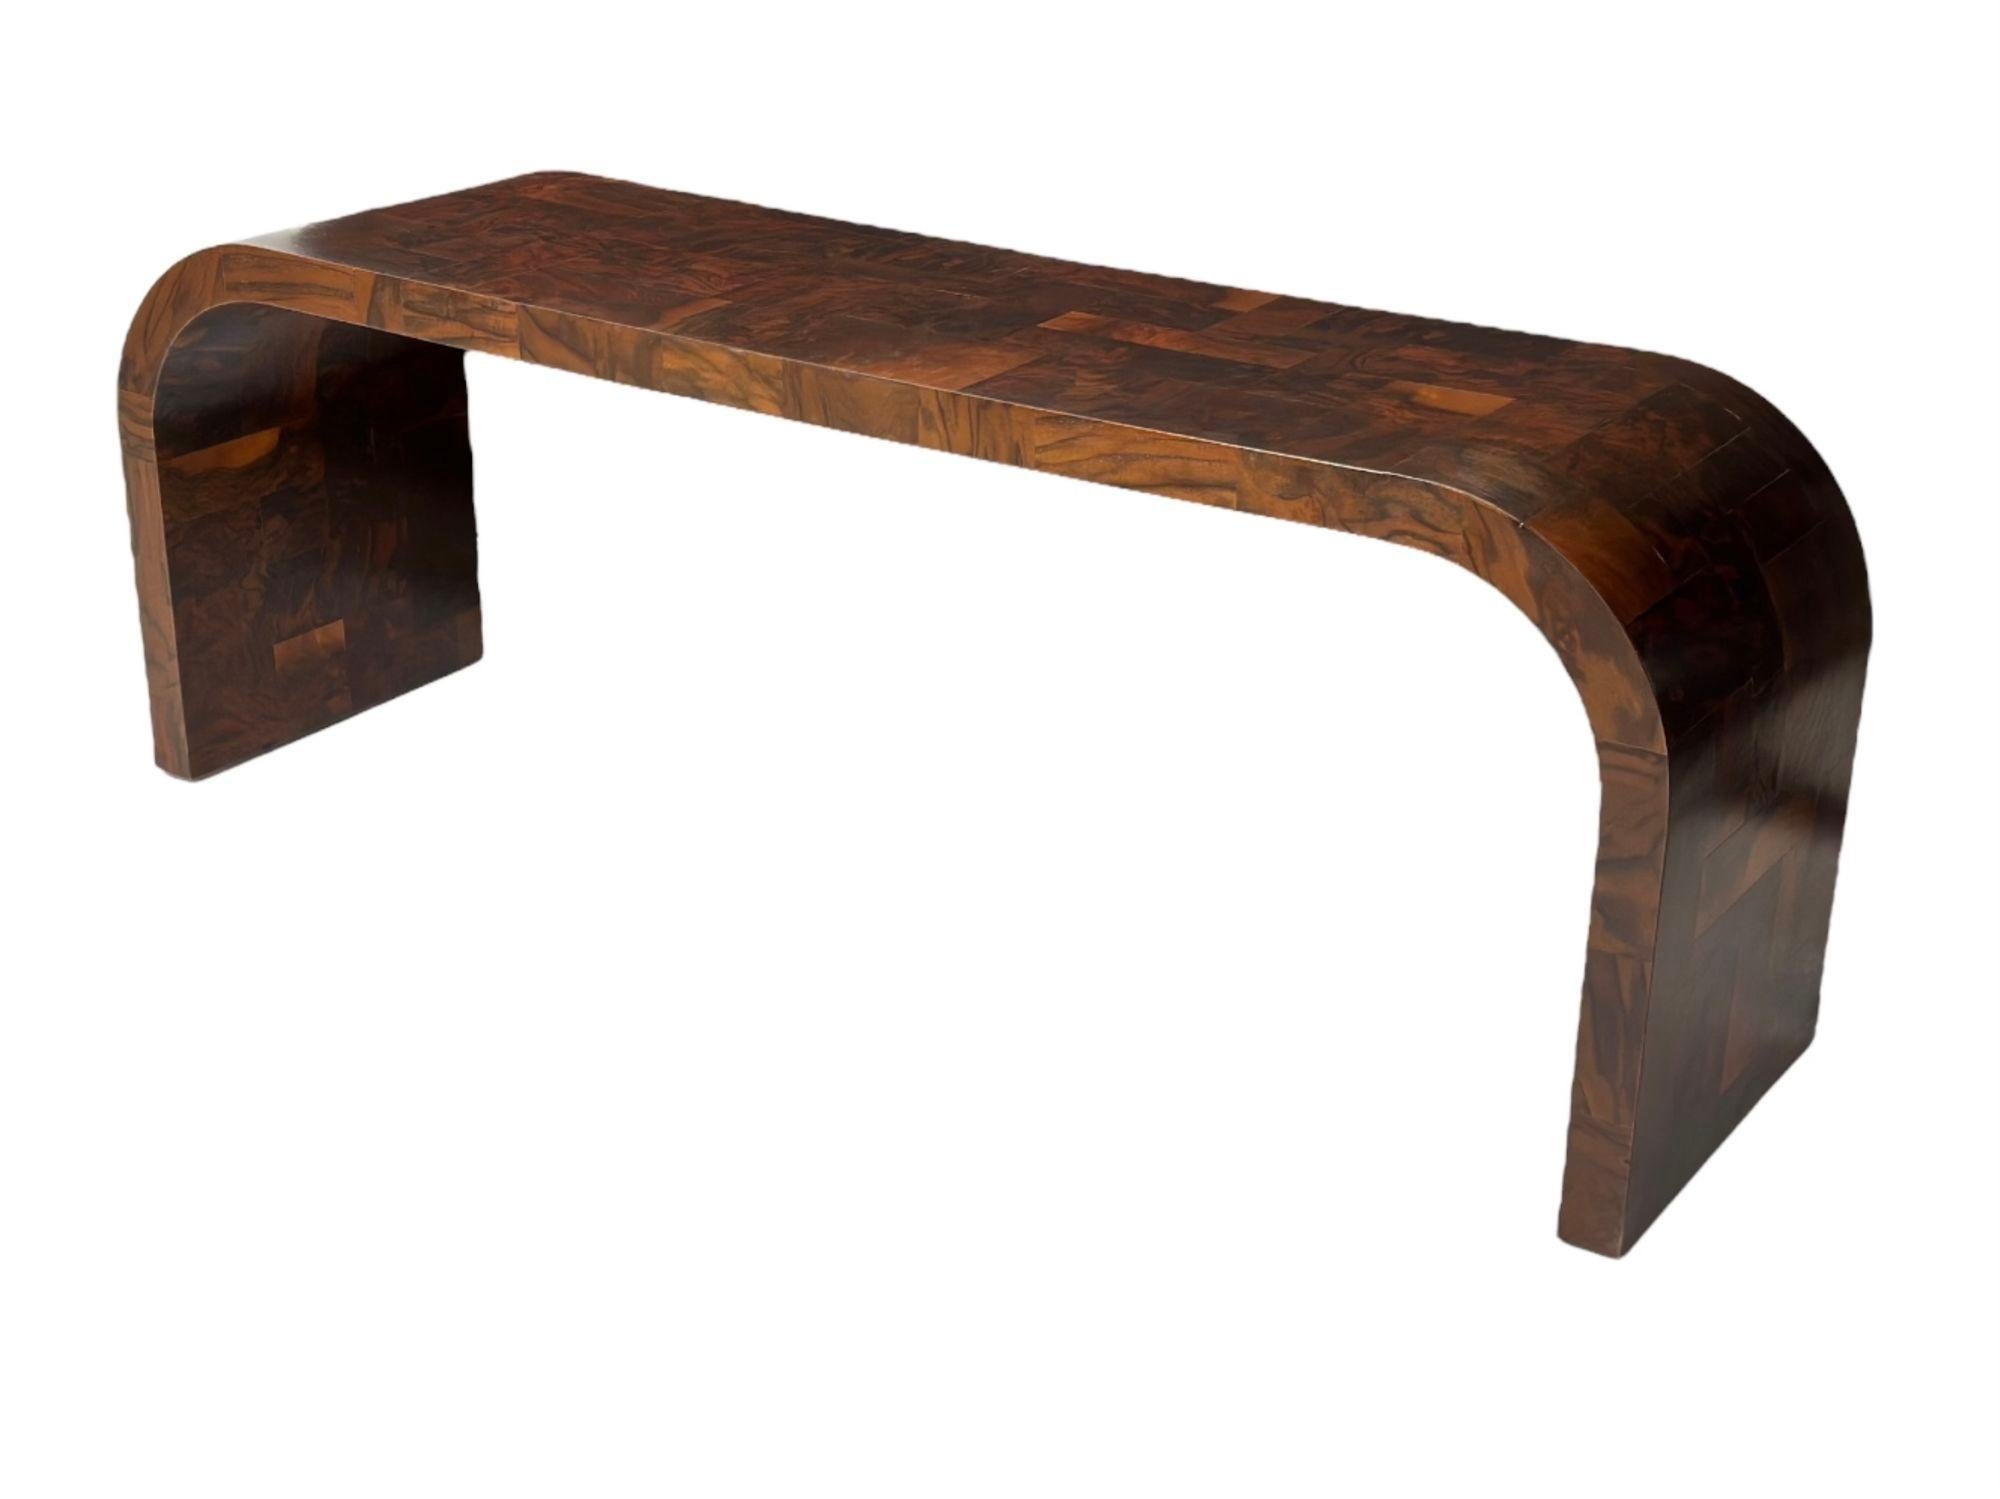 American Paul Evans Burl Patchwork Waterfall Cityscape Console Table, 1970 For Sale